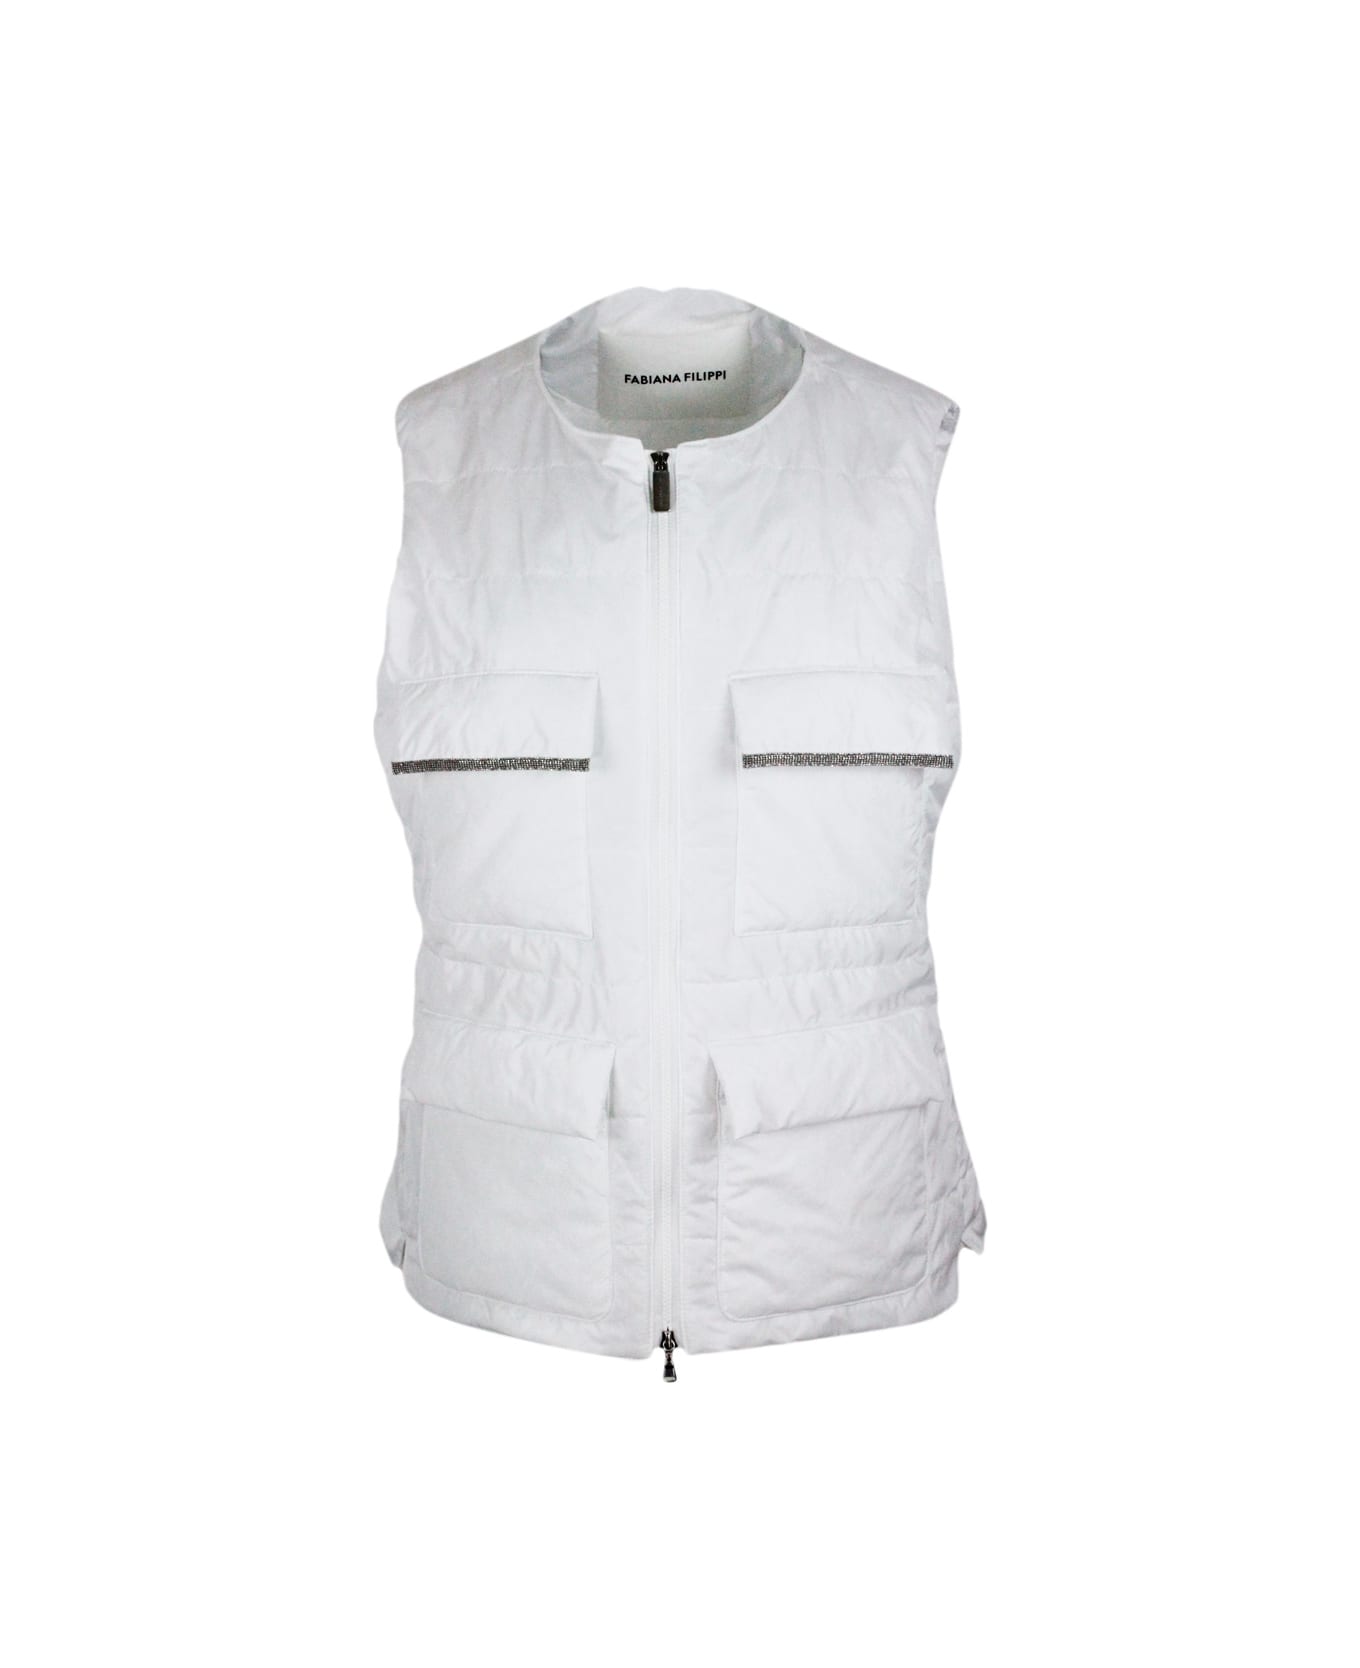 Fabiana Filippi Sleeveless Gilet In Light Padded Nylon With Zip Closure And Front Pockets With Jewels - White